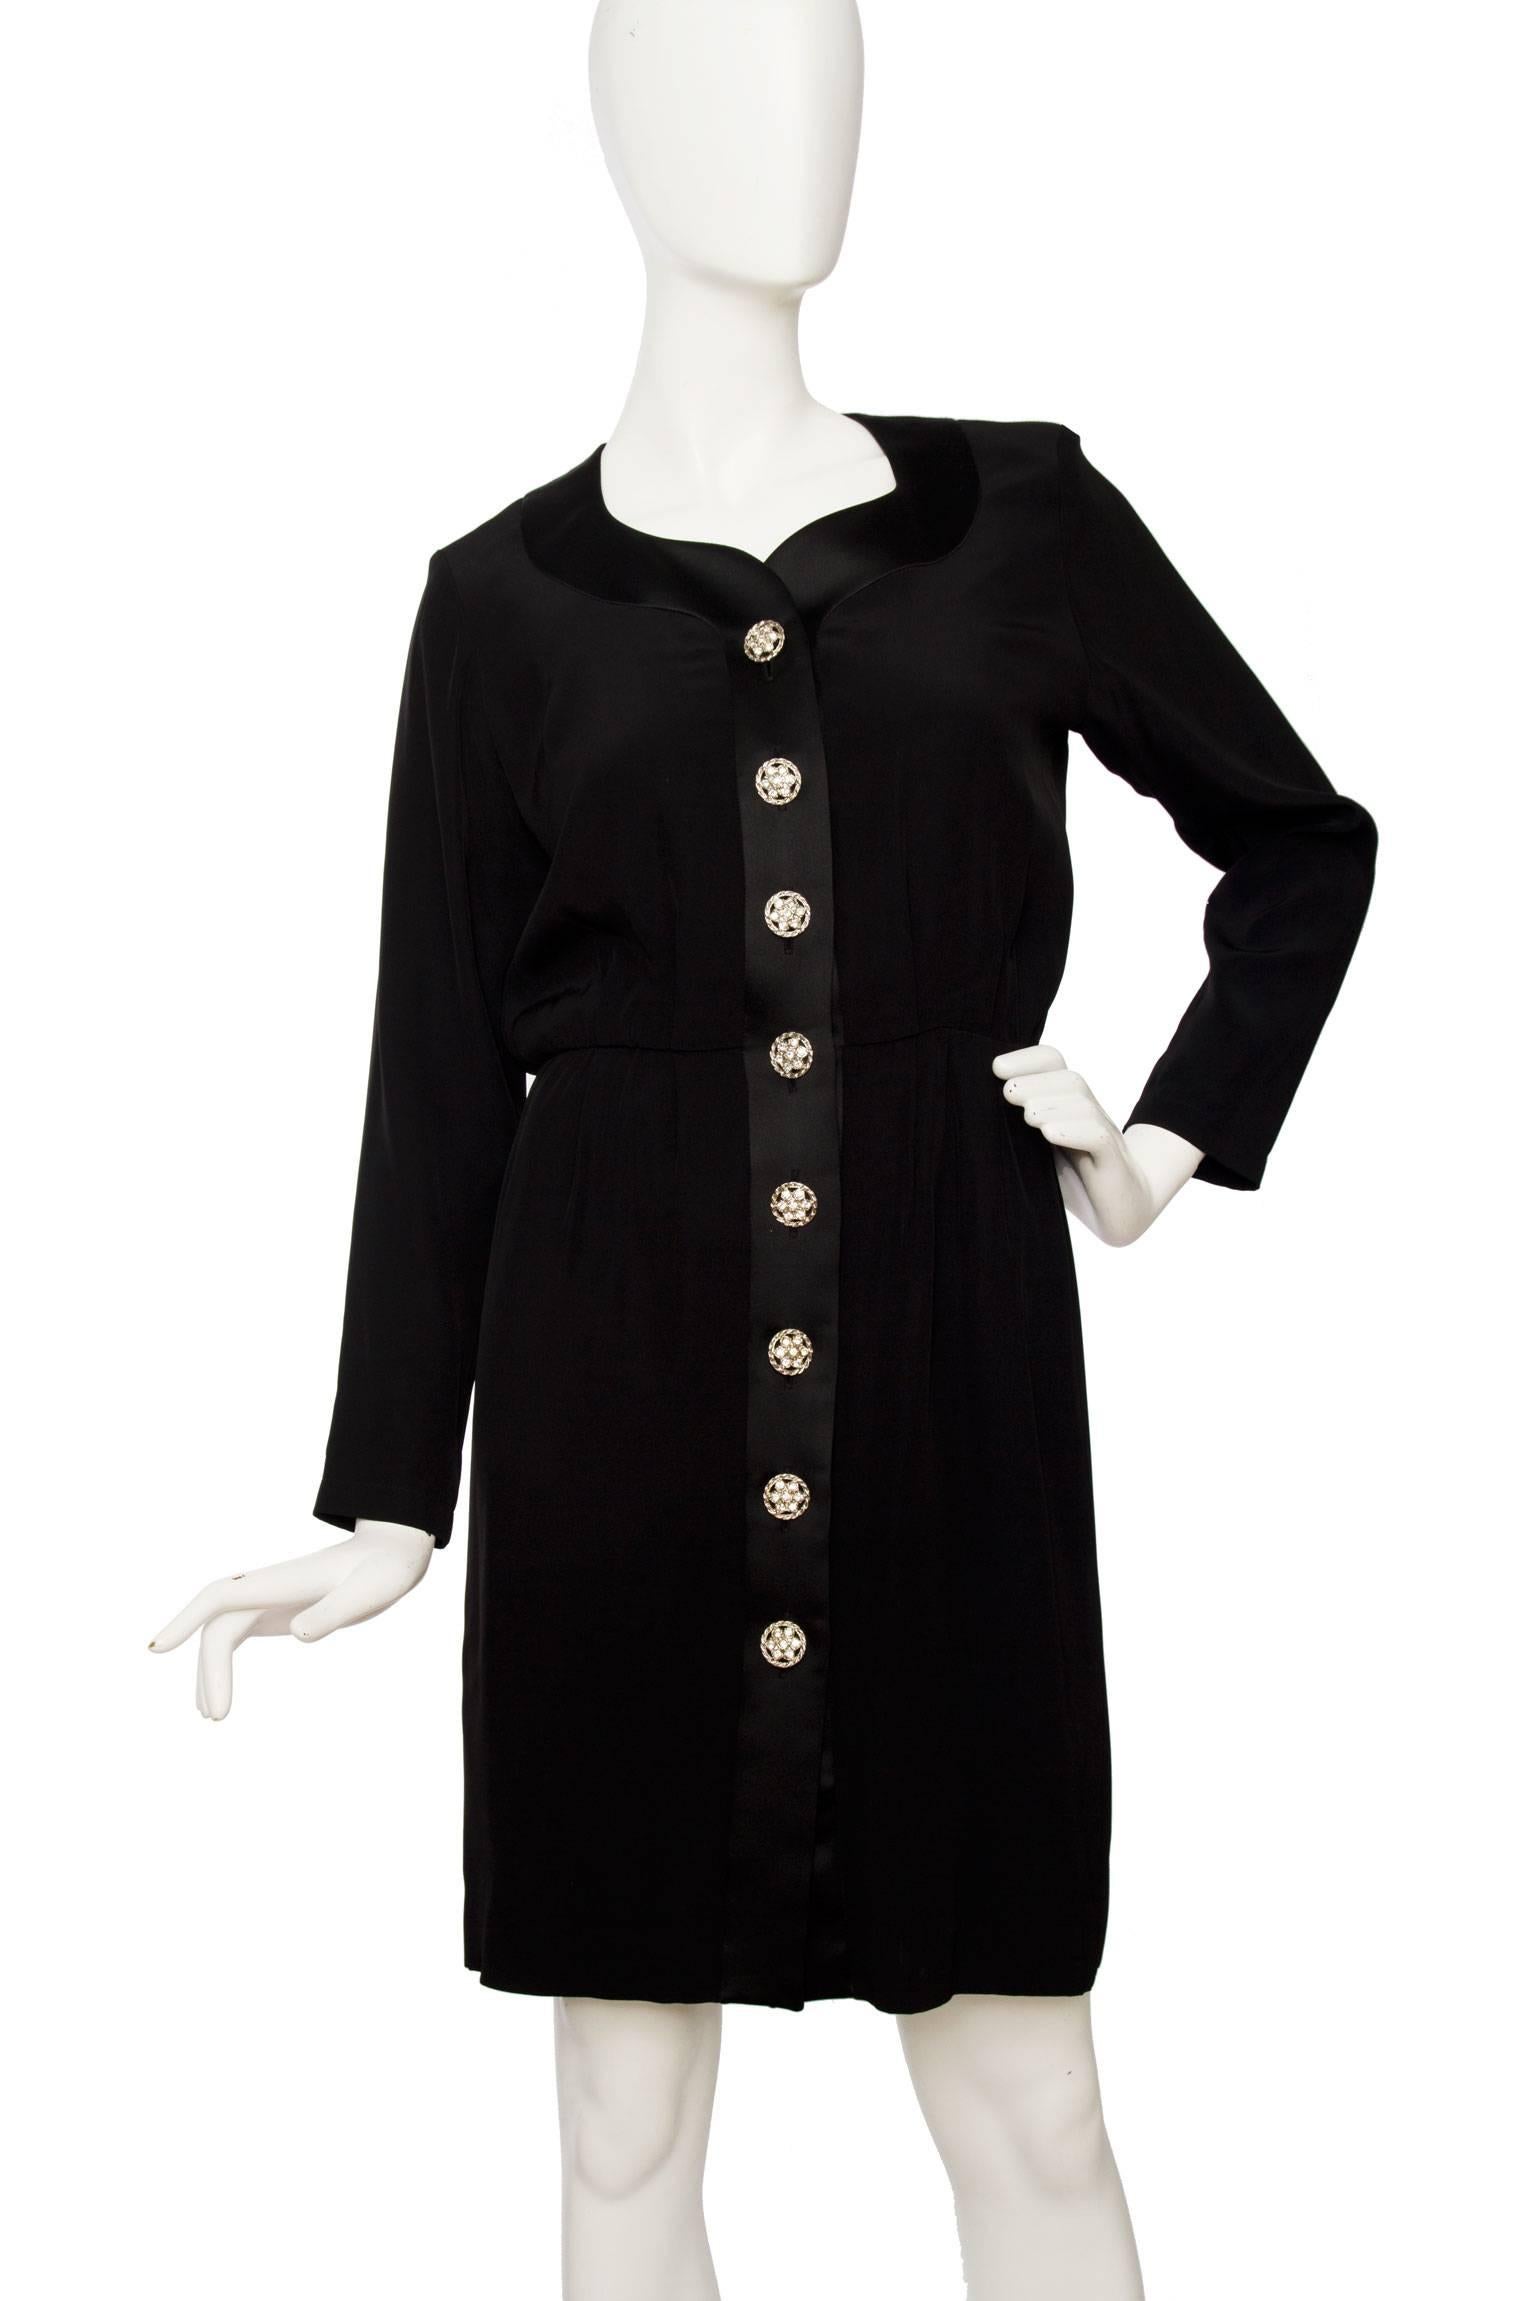 A glamorous 1980s Yves Saint Laurent little black cocktail dress, with a narrow waist, long sleeves and a satin trim around the sweetheart neckline and down the front. On the front the dress is embelished with rhinestone studded buttons. The dress